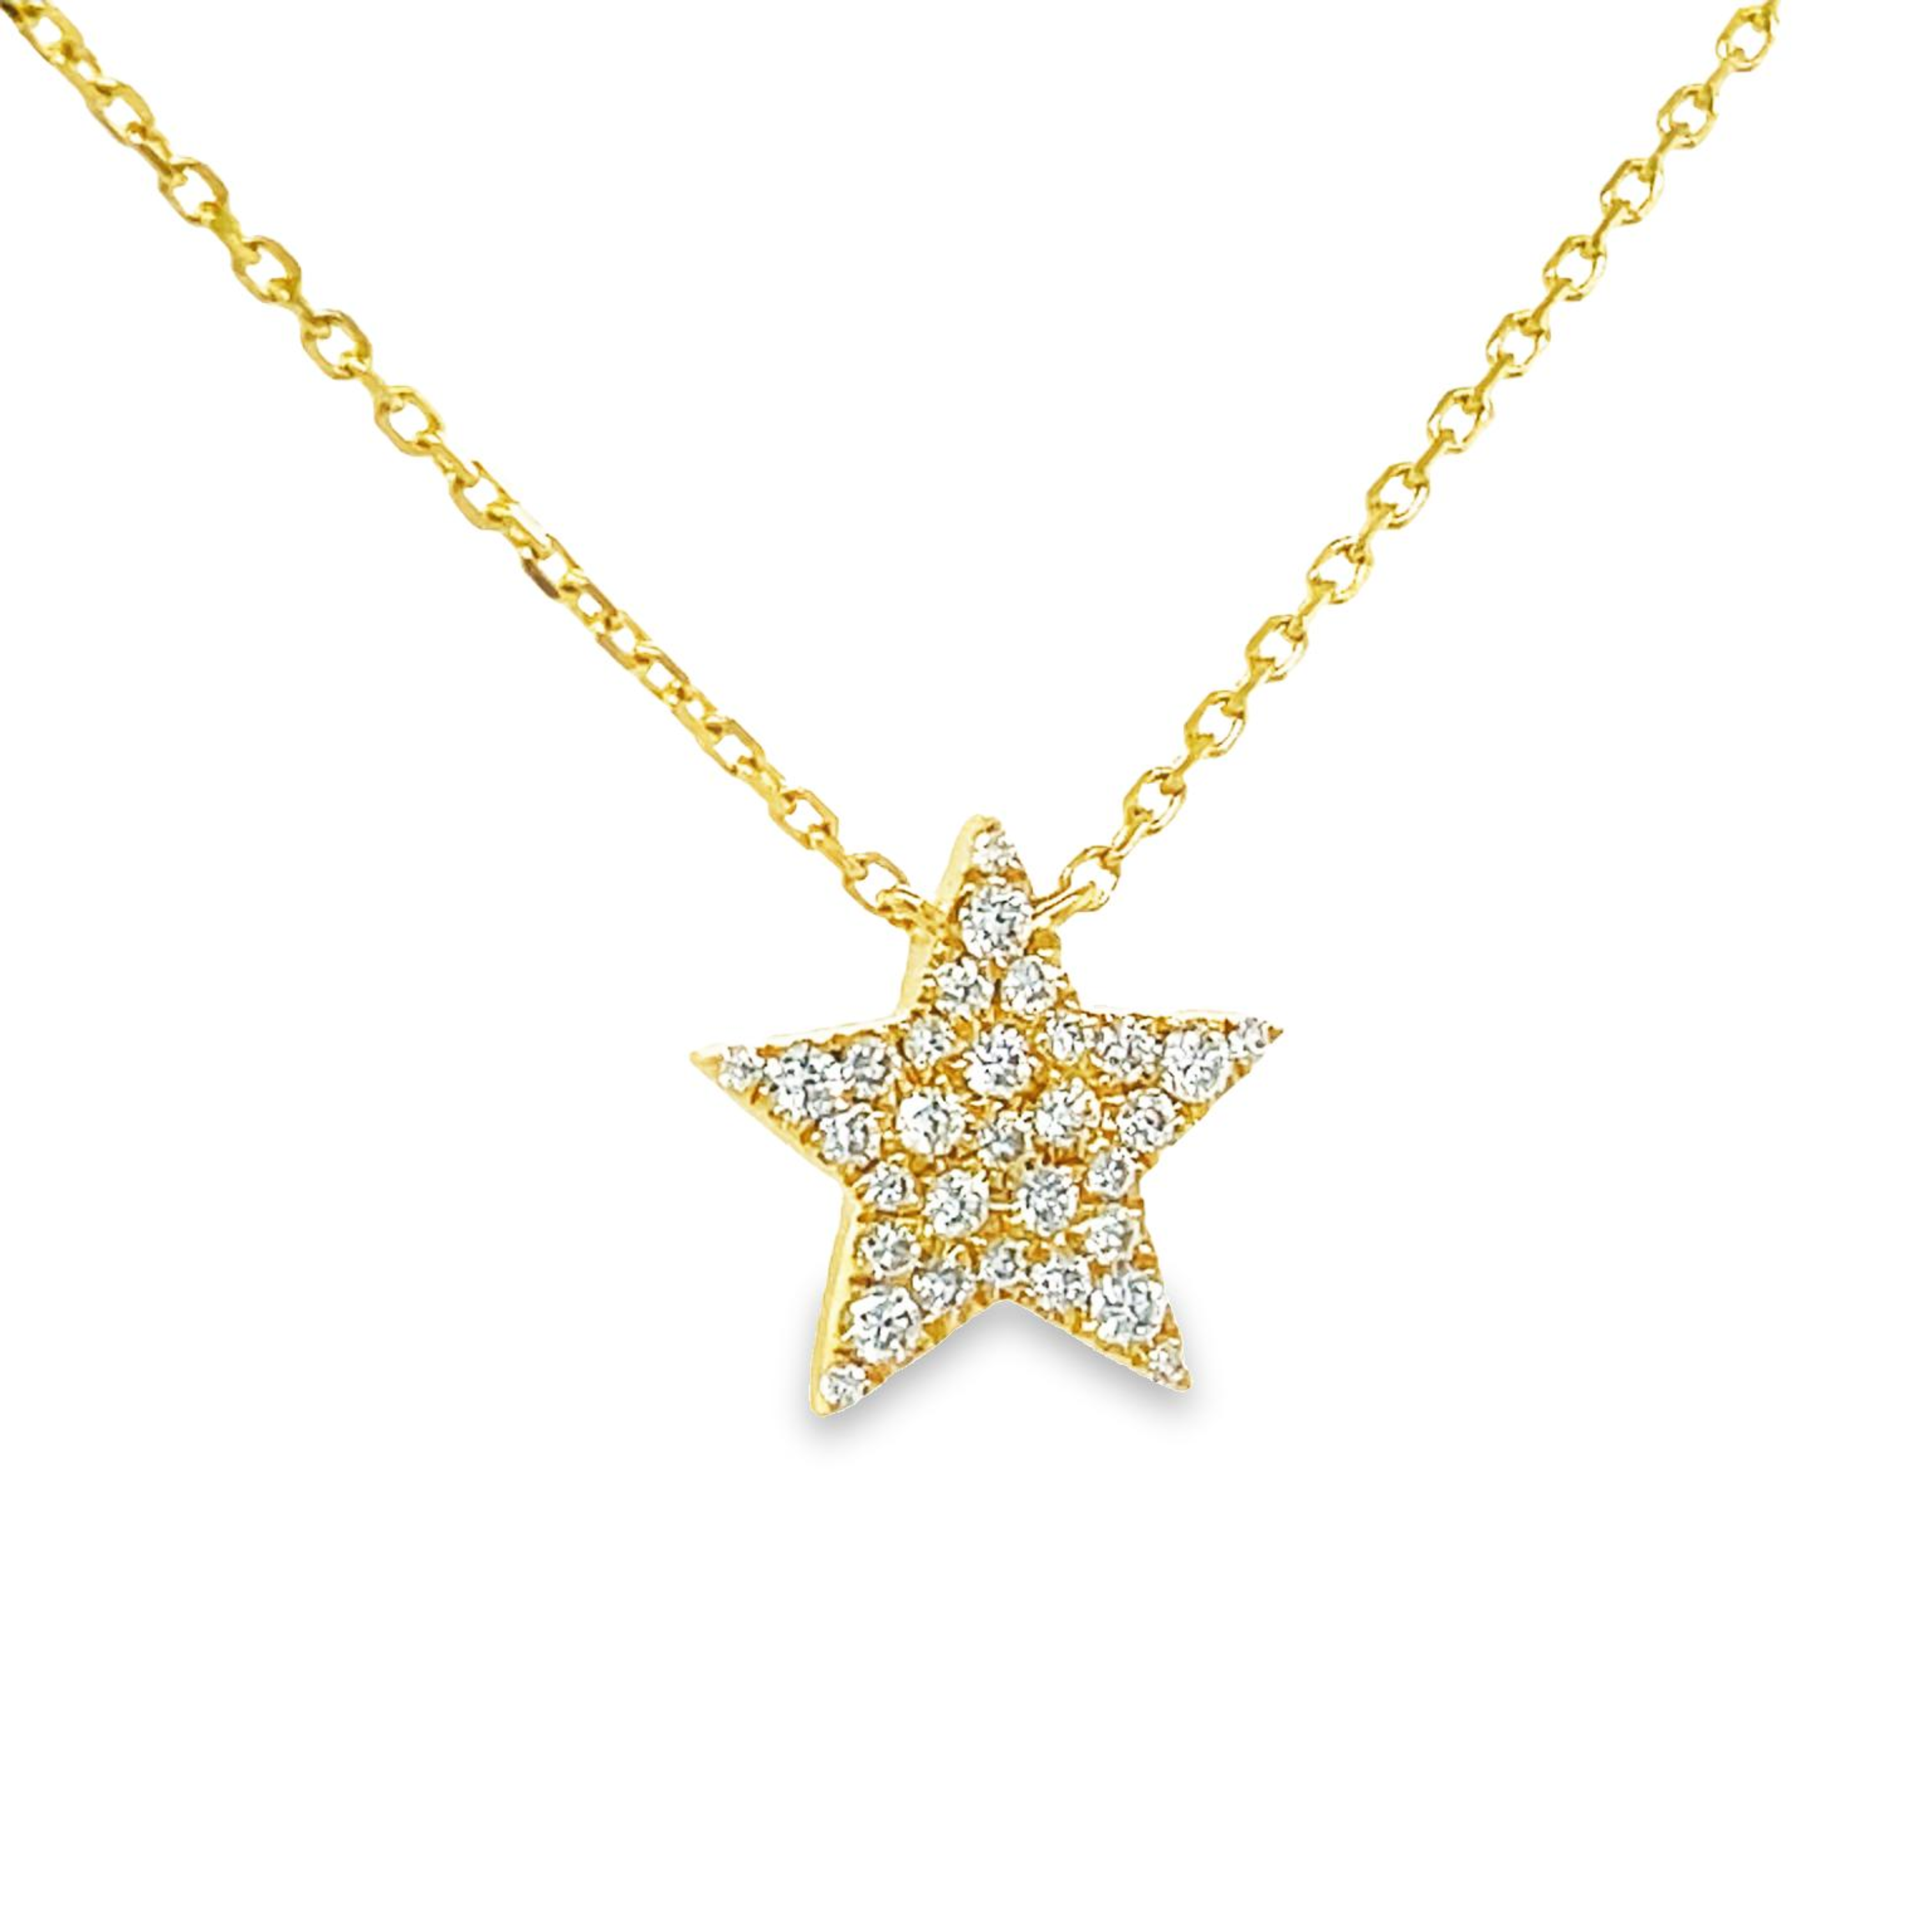 Crafted from 14K yellow gold, this dazzling star pendant is encircled with round diamonds totaling 0.21 cts. in F/G color, with a 10.00mm circumference (including bail). Comes with a 16" yellow gold chain, perfect for a dazzling everyday look!